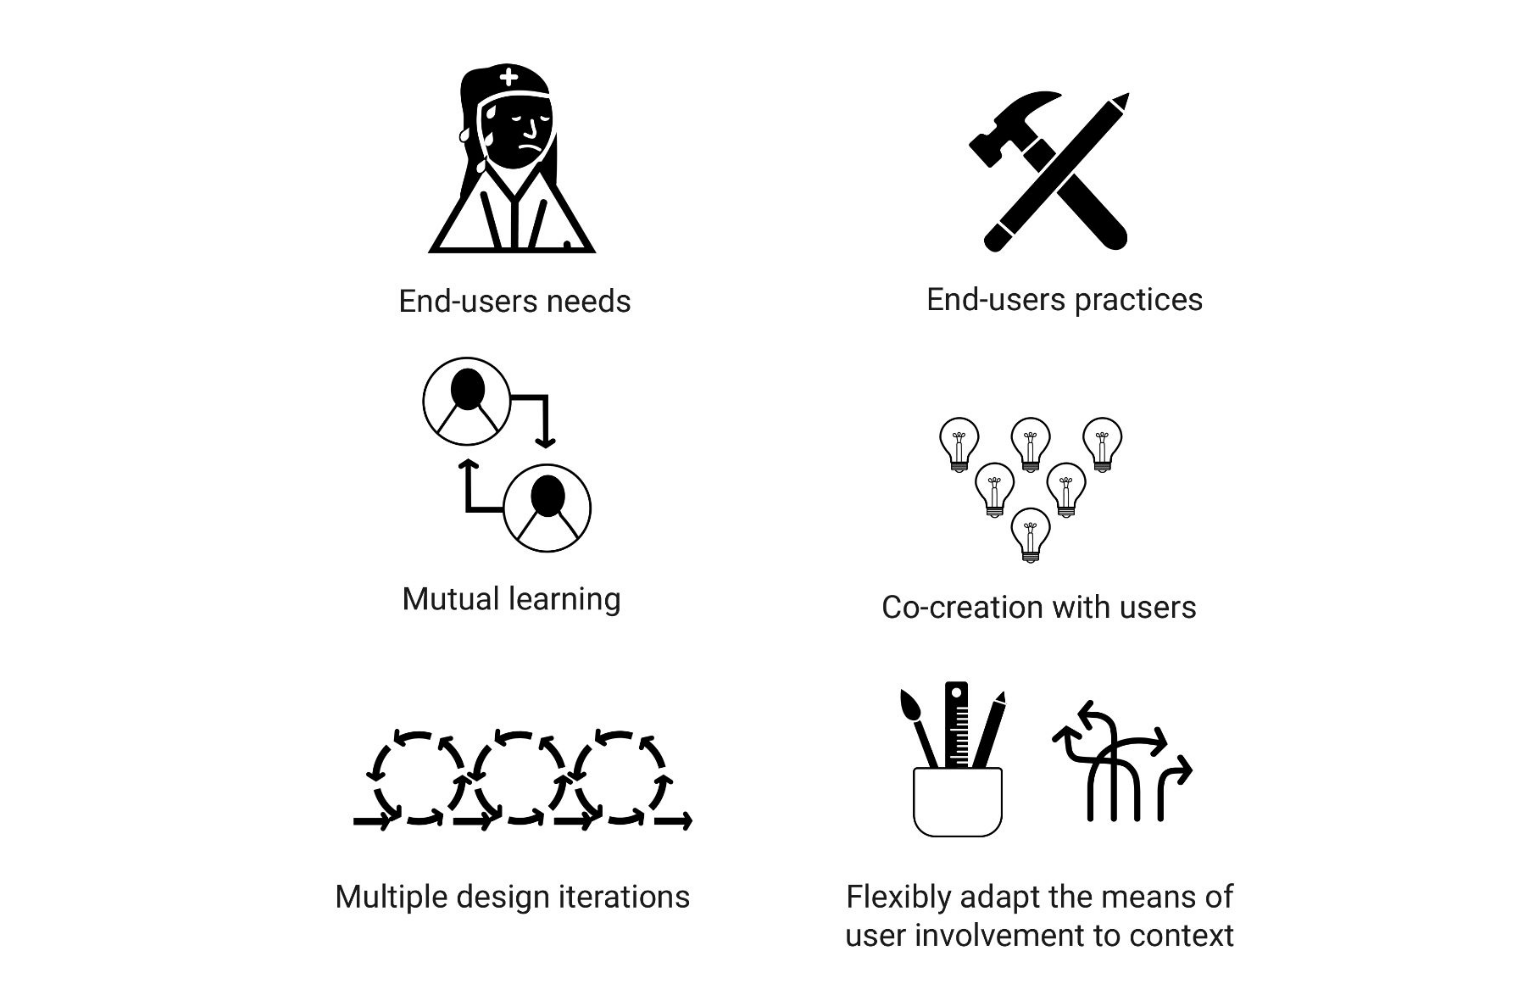 Principles of user involvement during design: focus on end-users needs, end-users practices, mutual learning, co-creation with users through multiple design iterations. Flexibly adapt the means of user involvement to context.